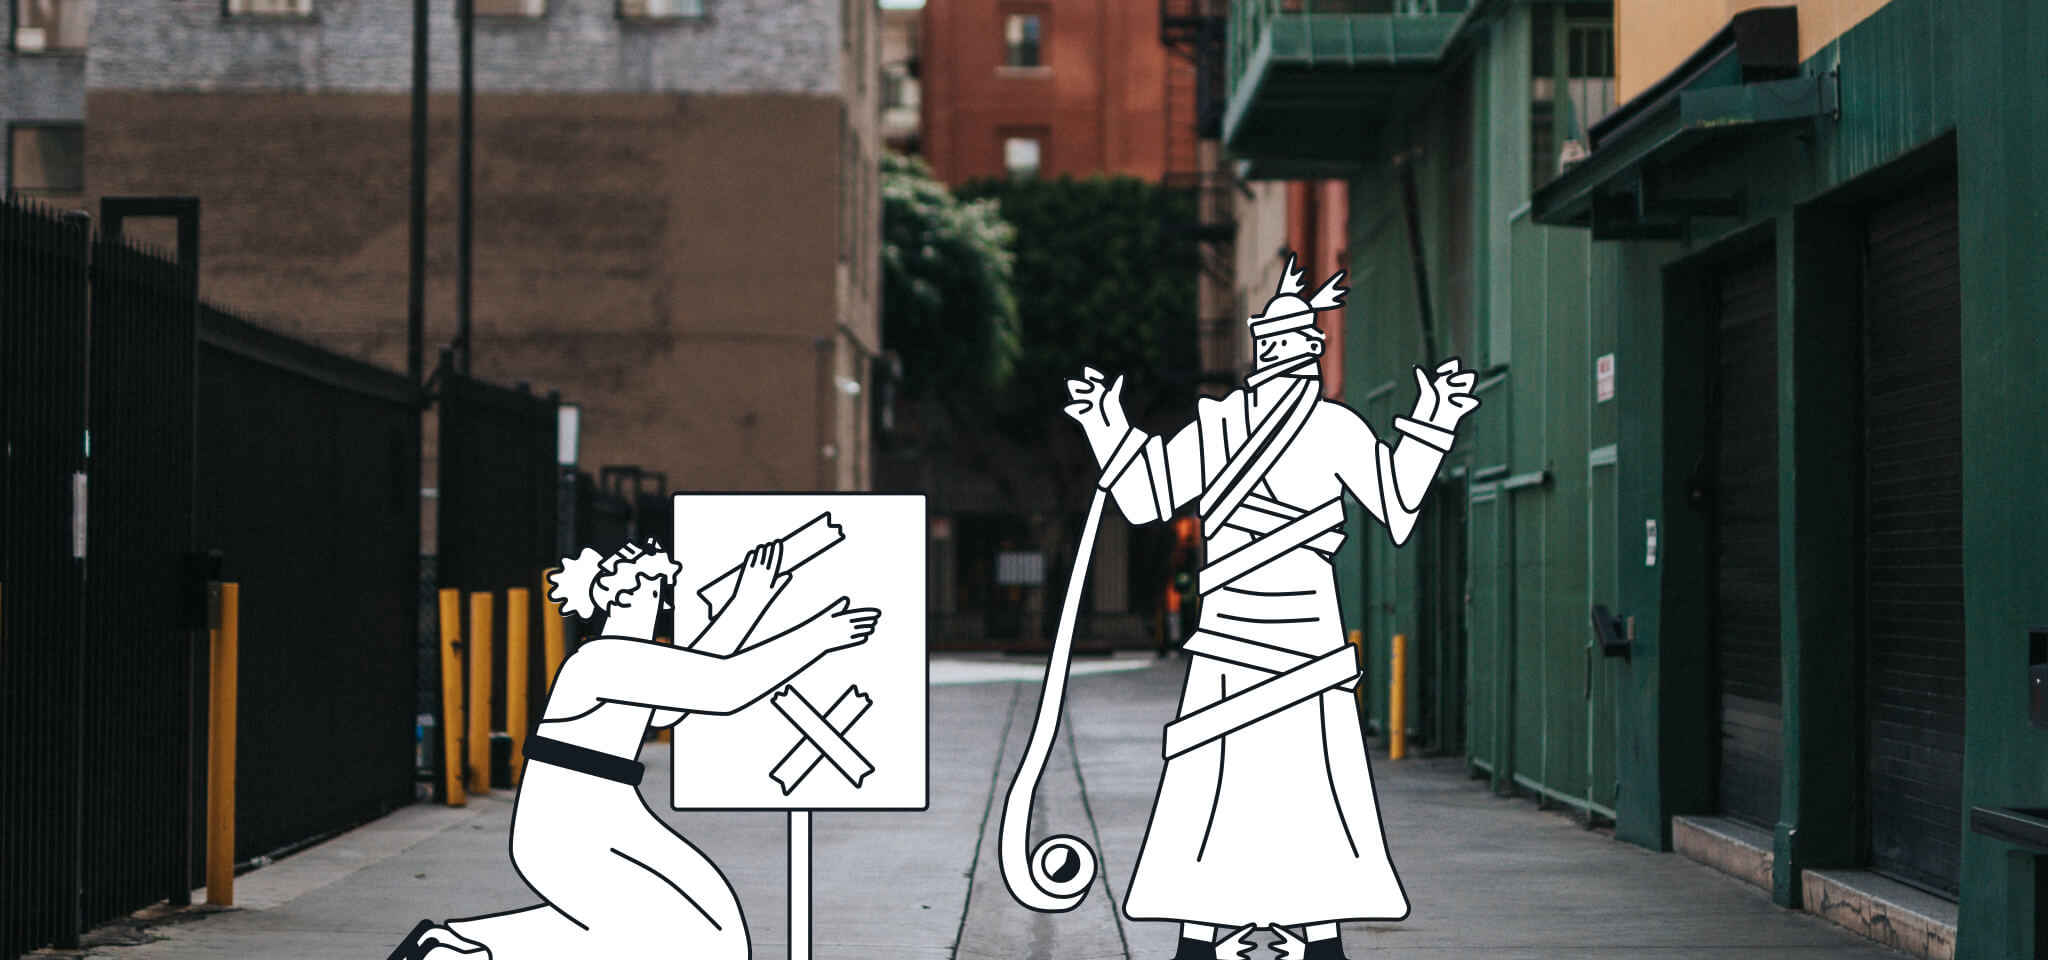 Hermes is tangled up with tape while helping a Goddess fix a sign in the street